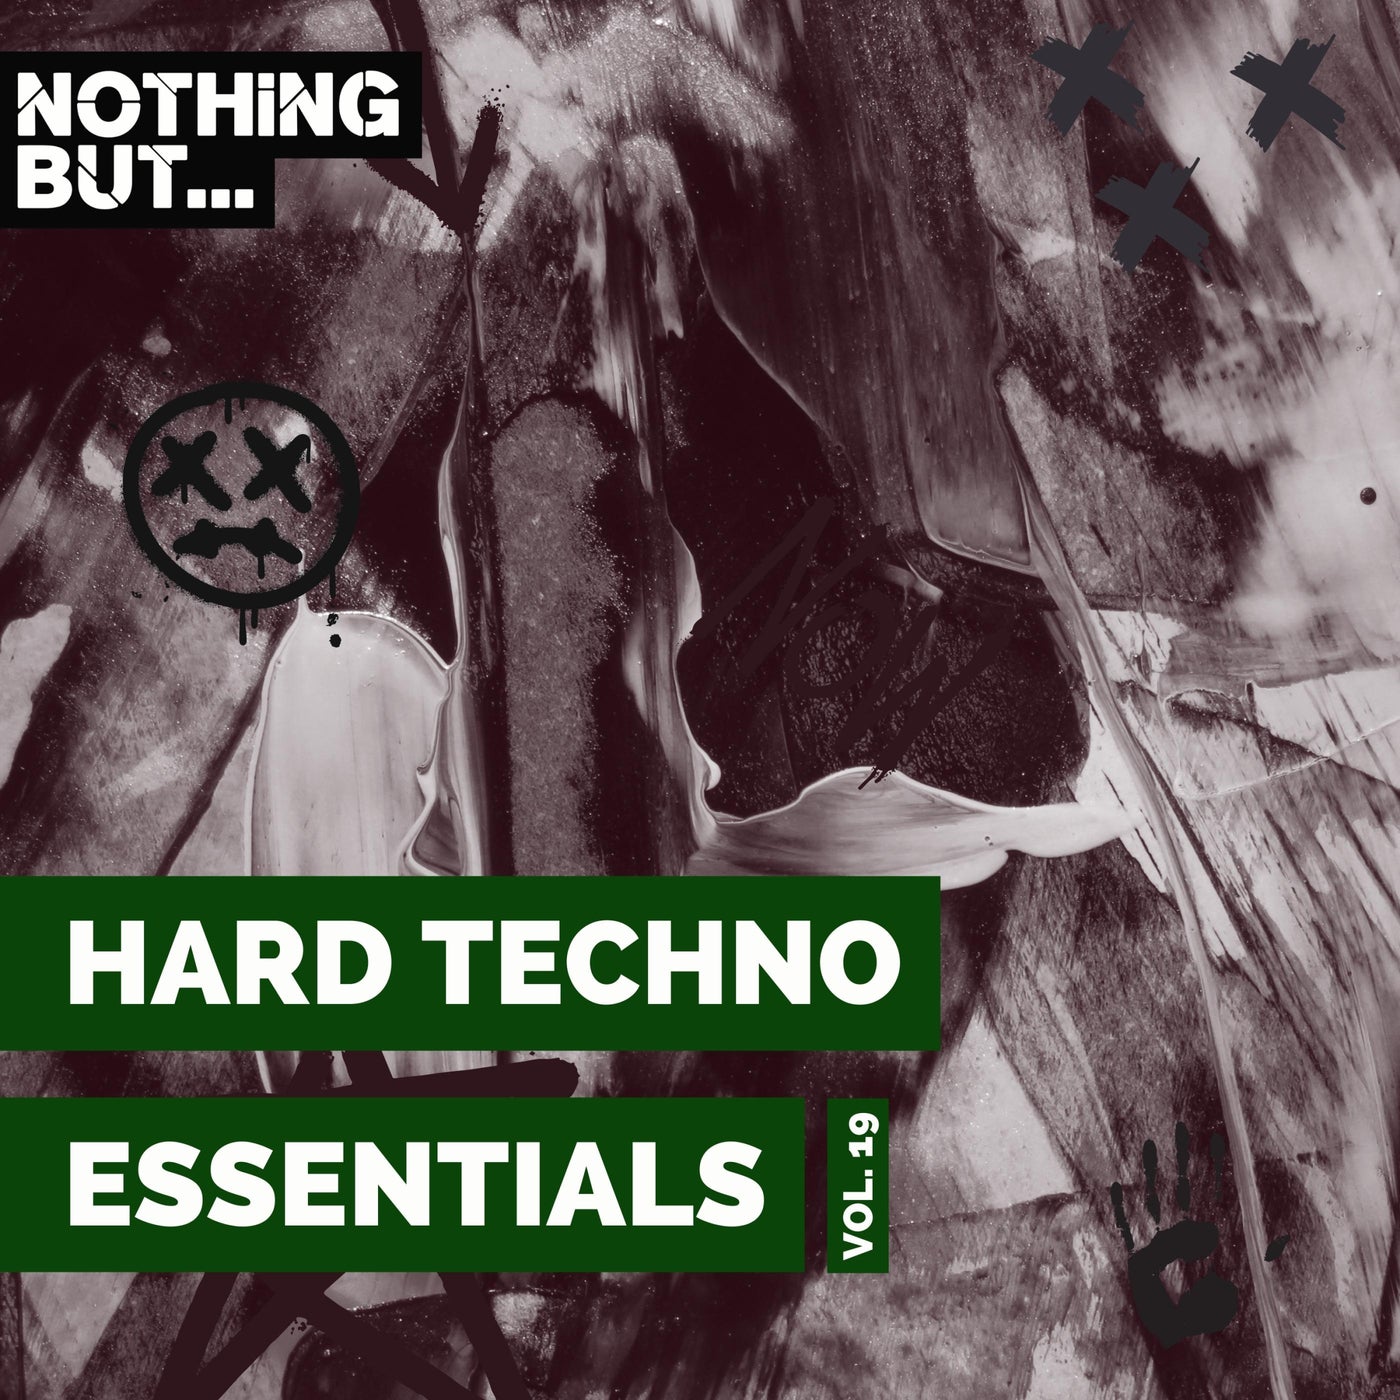 Nothing But... Hard Techno Essentials, Vol. 19